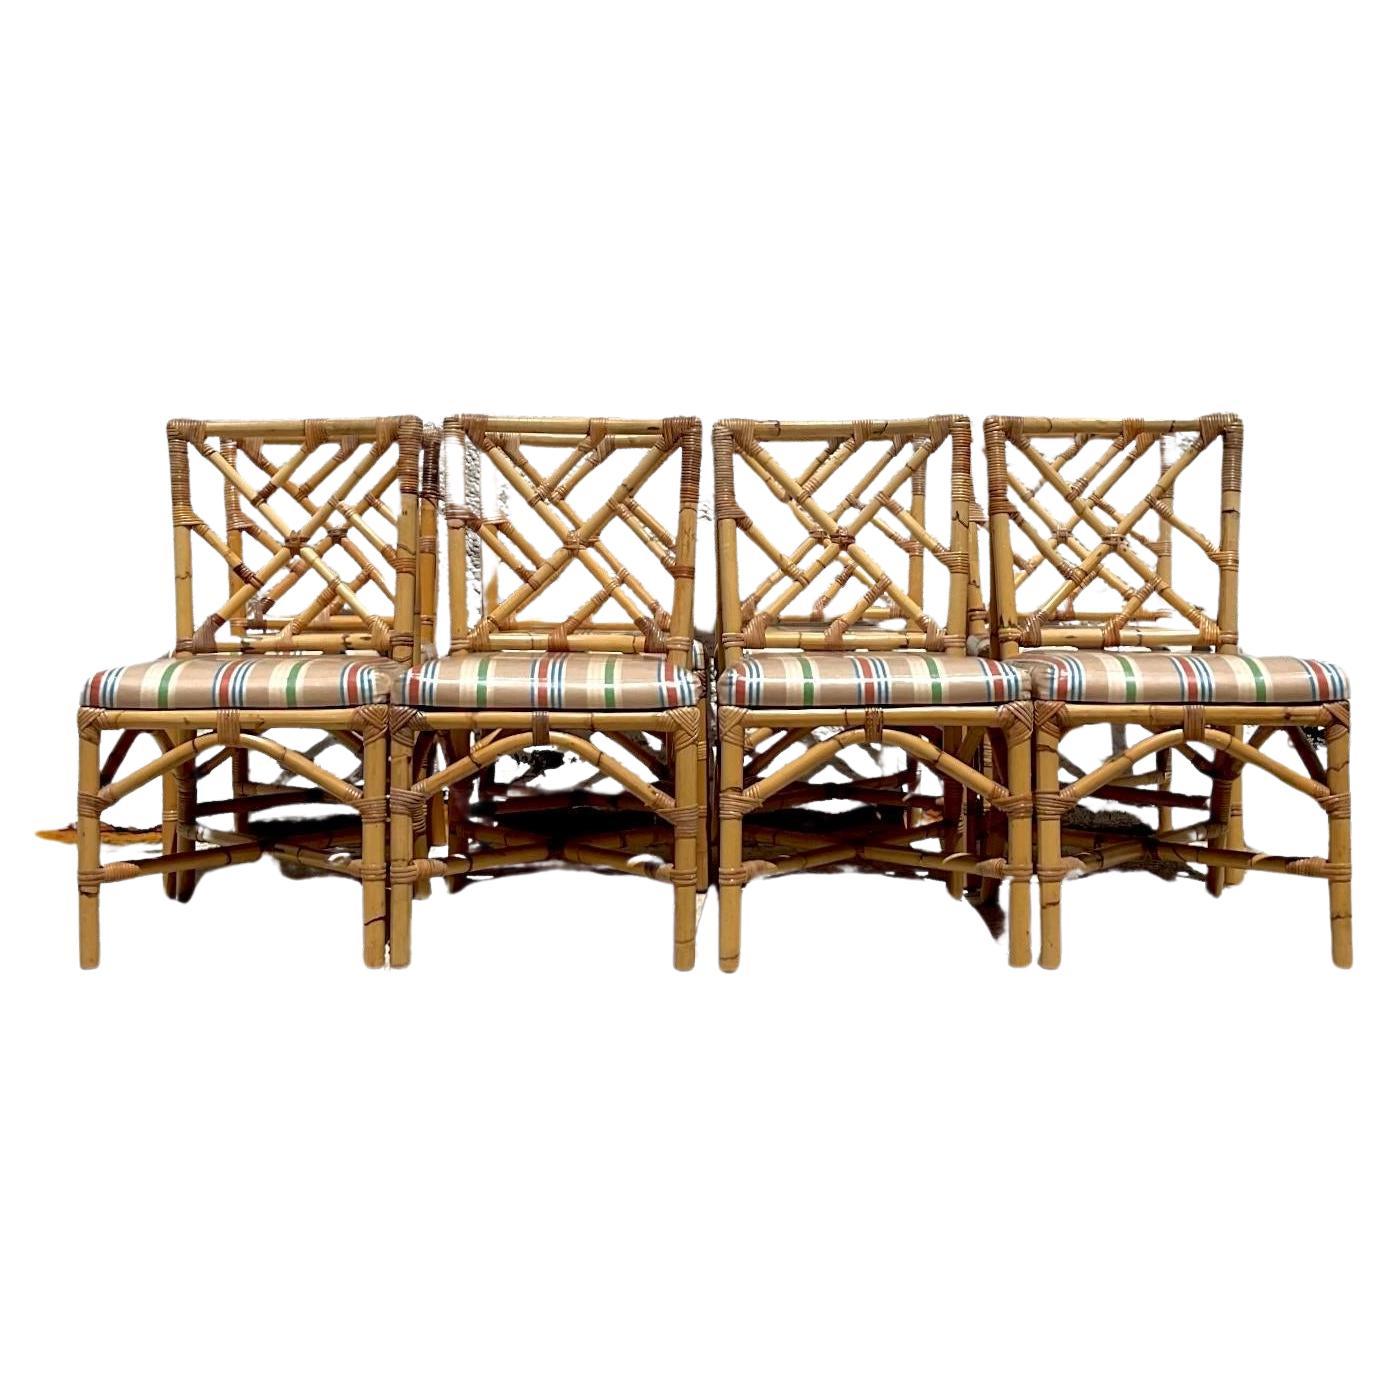 Vintage Coastal Chinese Chippendale Bamboo Dining Chairs - Set of 8